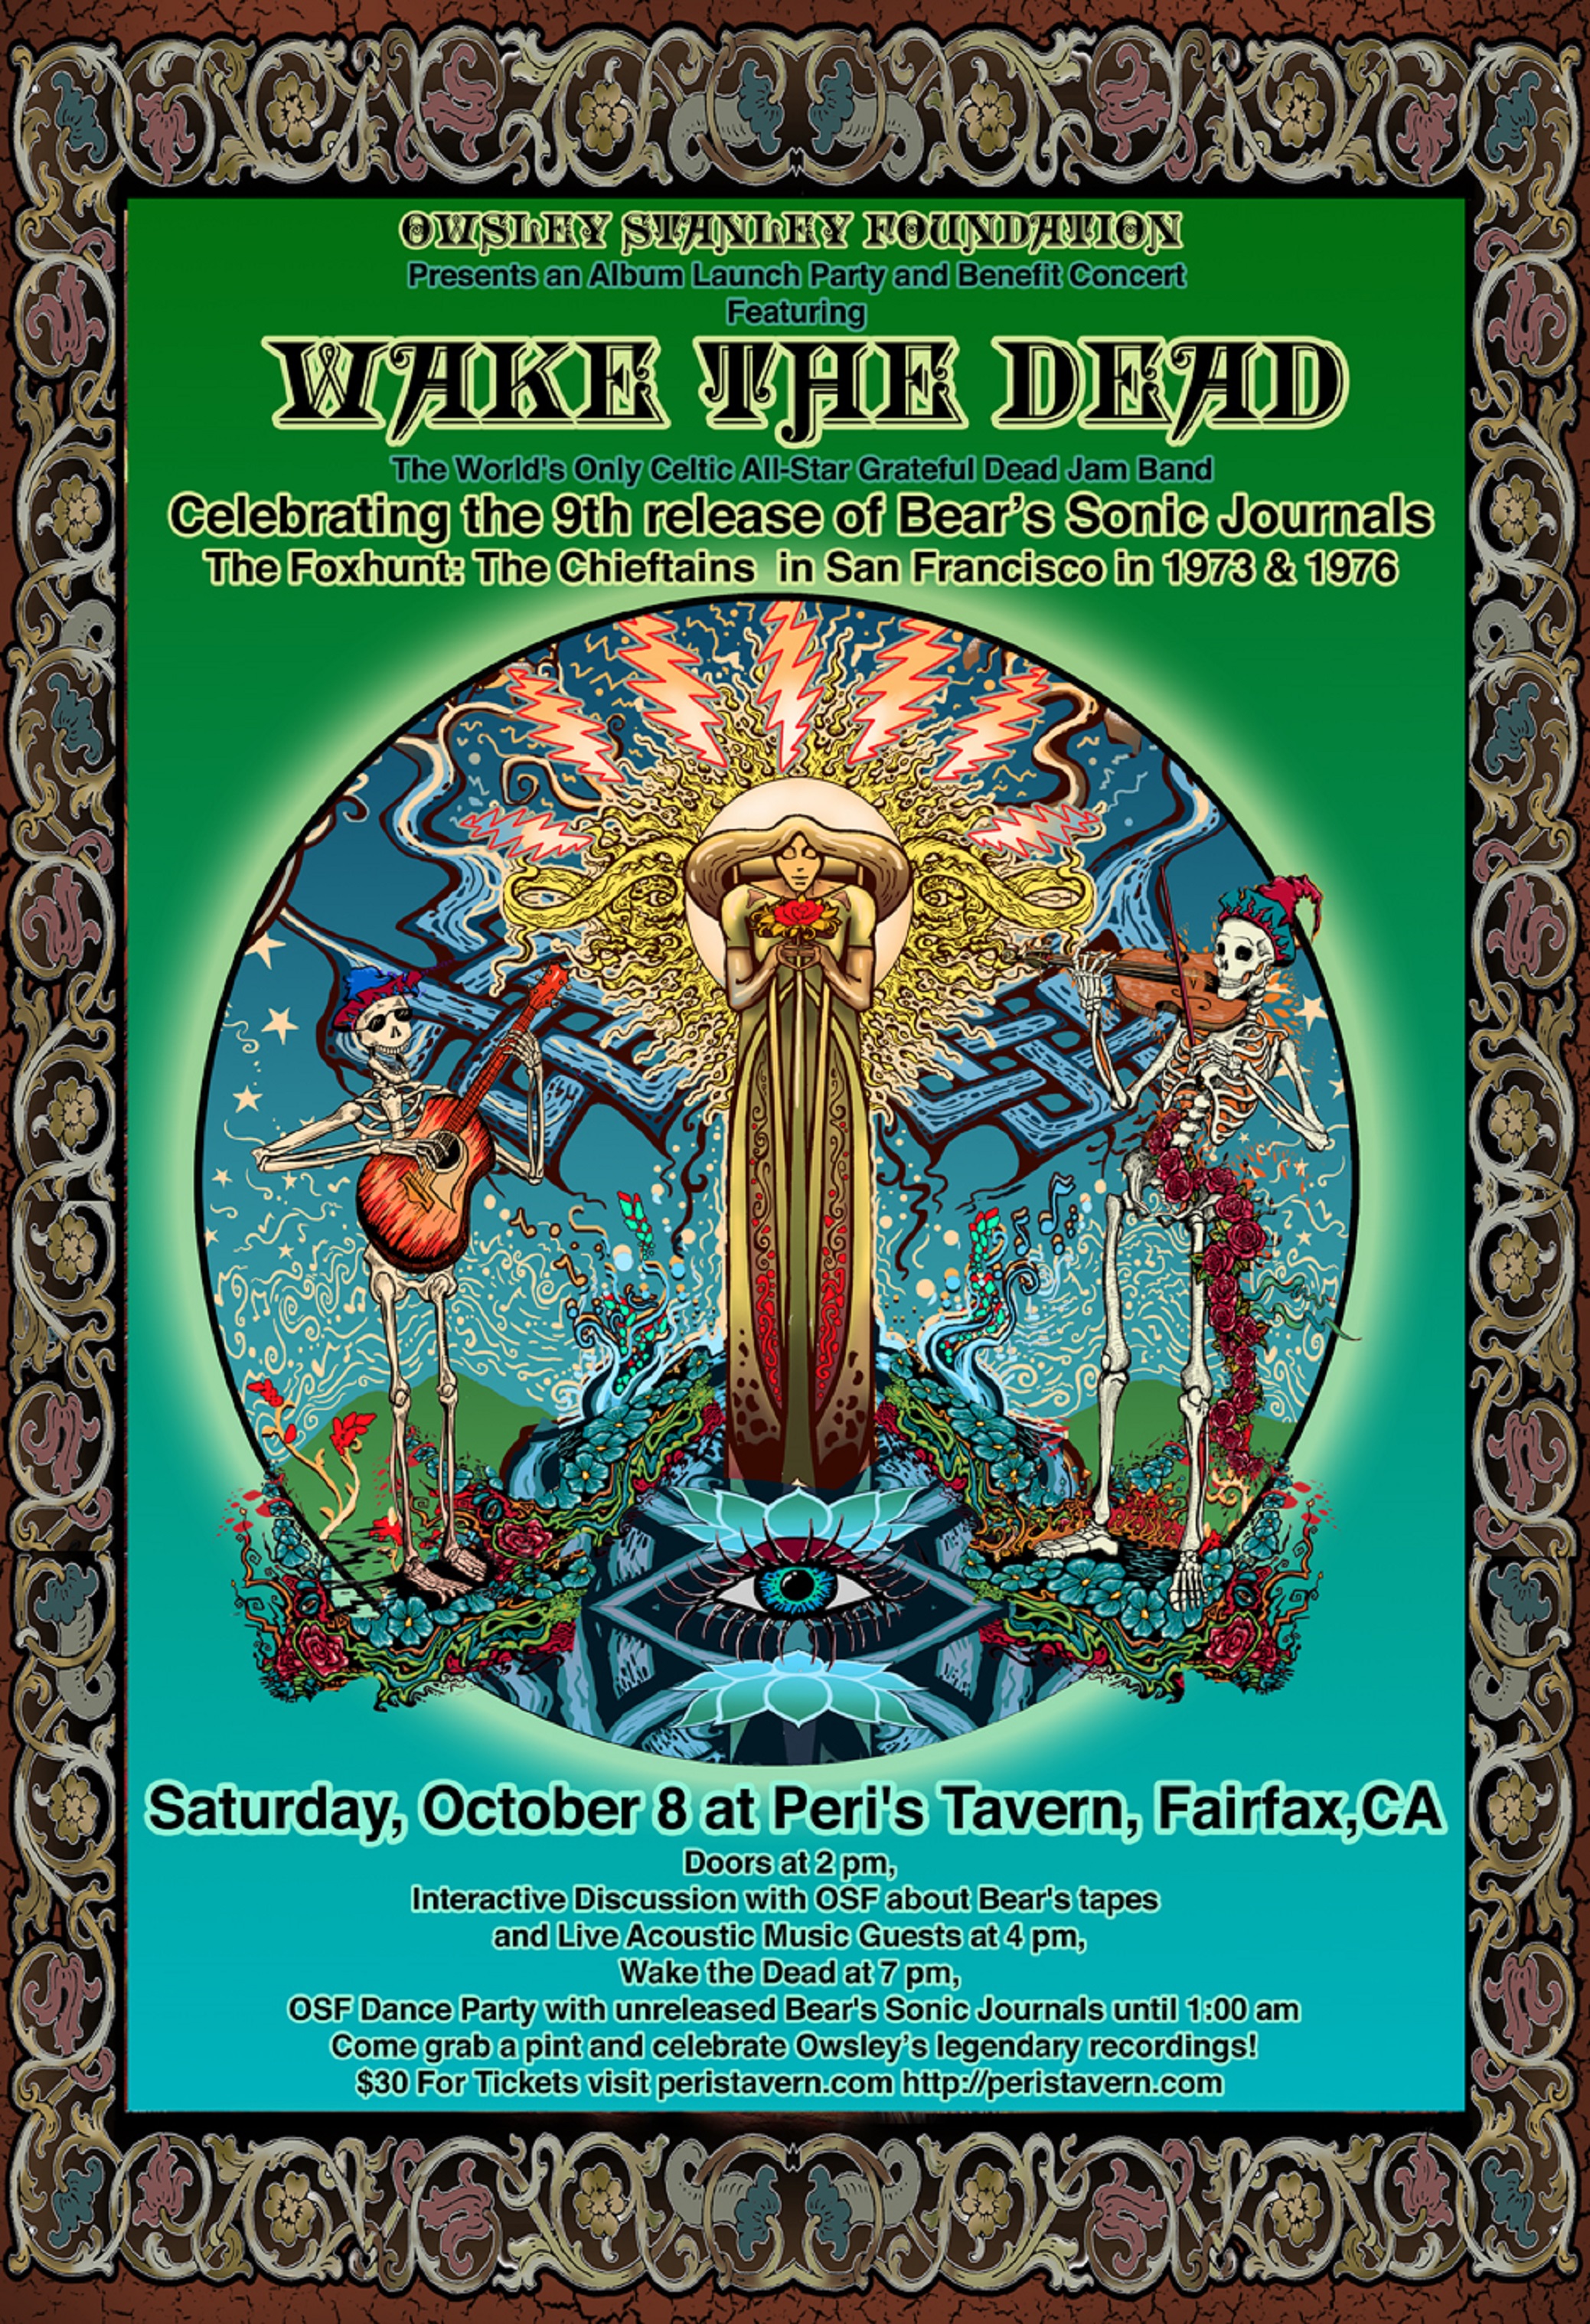 The World's Only Celtic All-Star Grateful Dead Jam Band Celebrating Owsley's recordings of The Chieftains